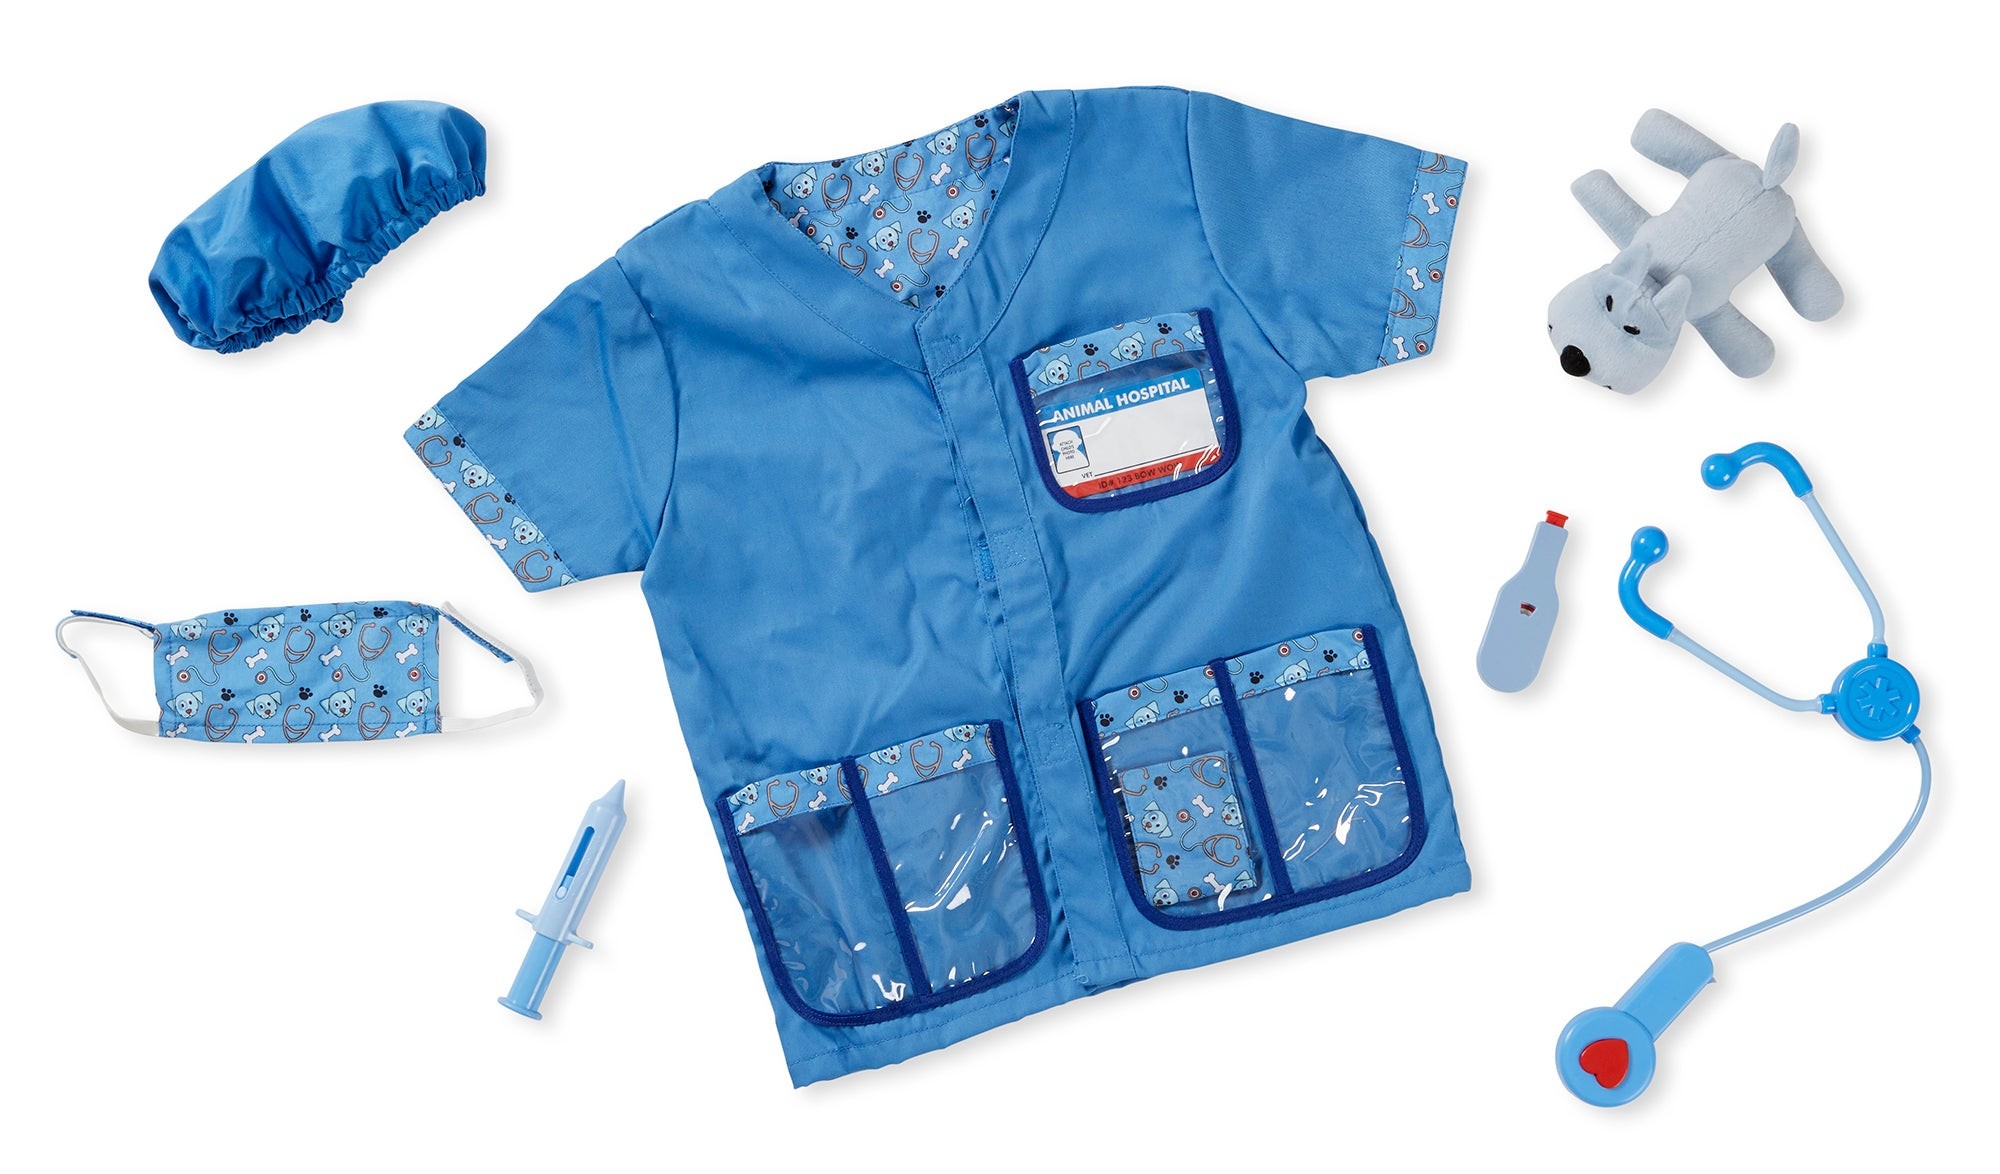 Veterinarian Role Play Costume Set Ages 3-6 Years